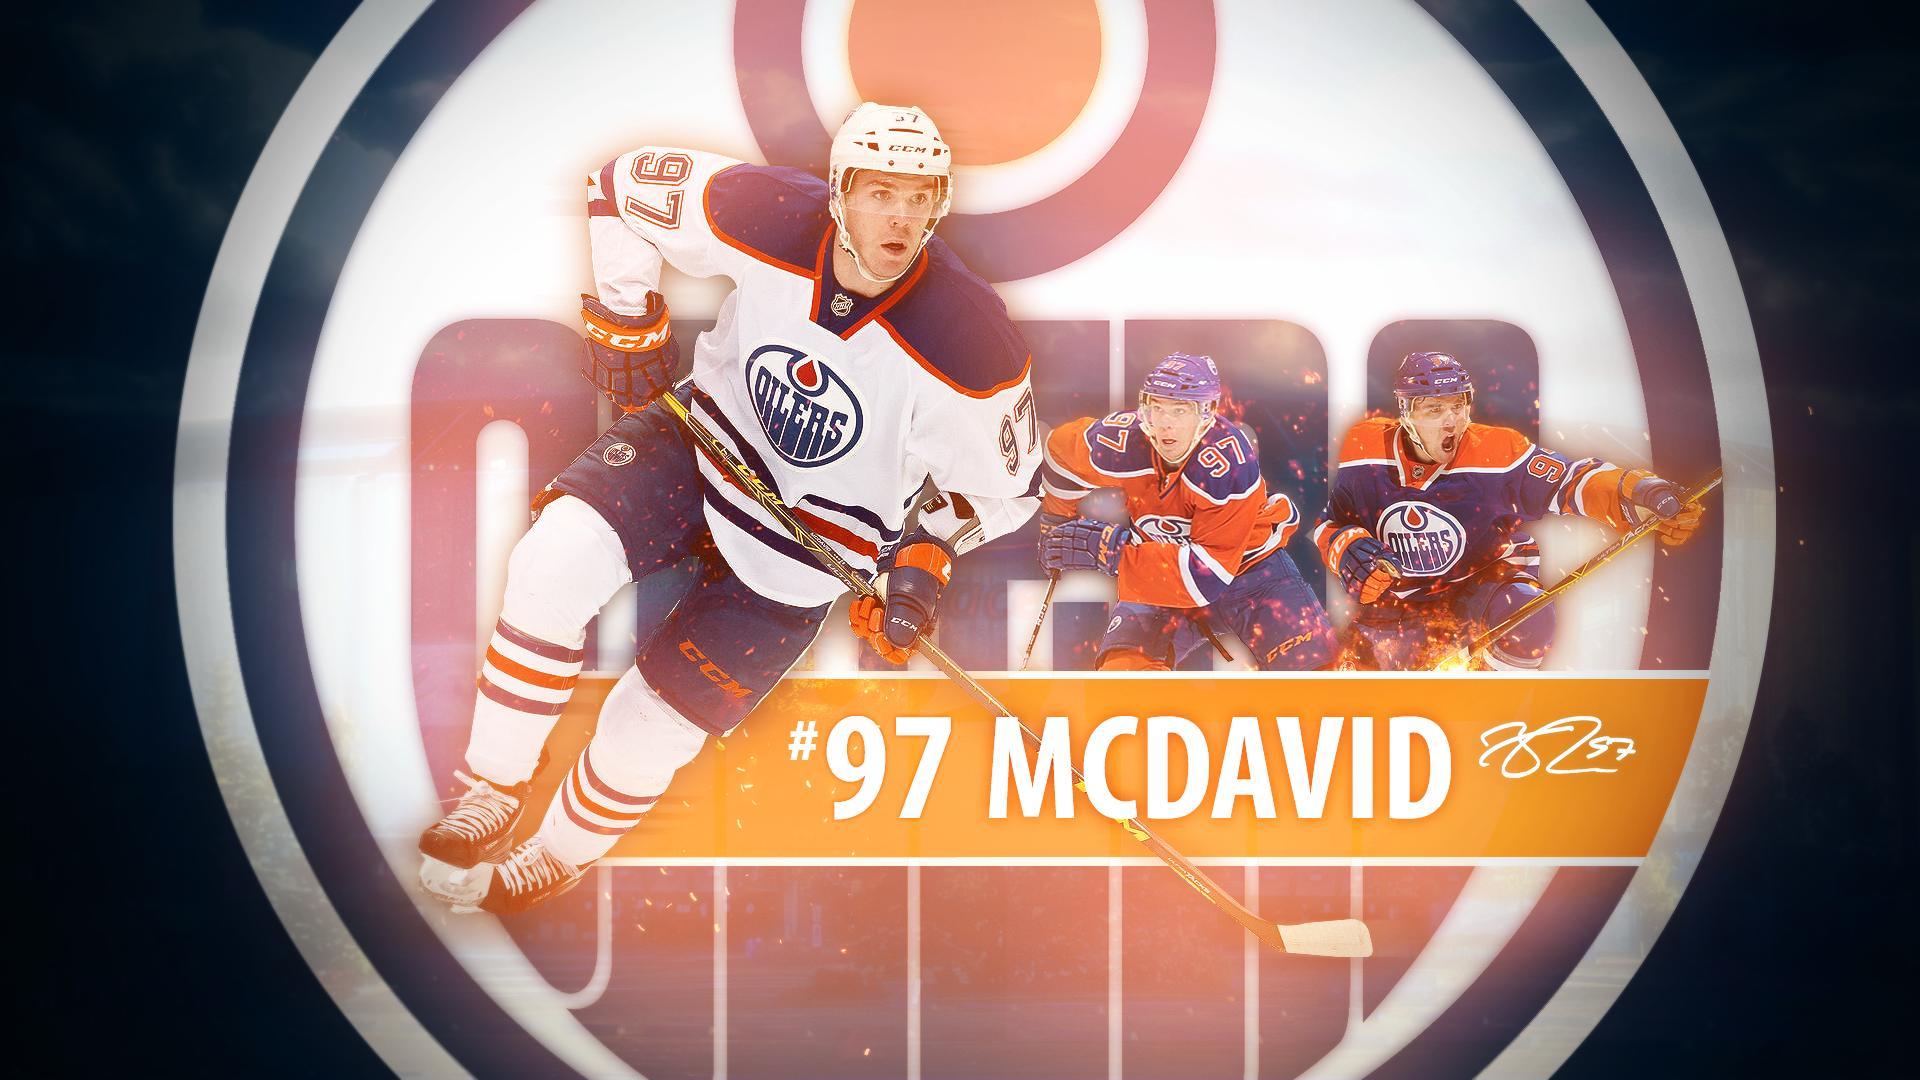 McDavid Wallpaper (as requested)